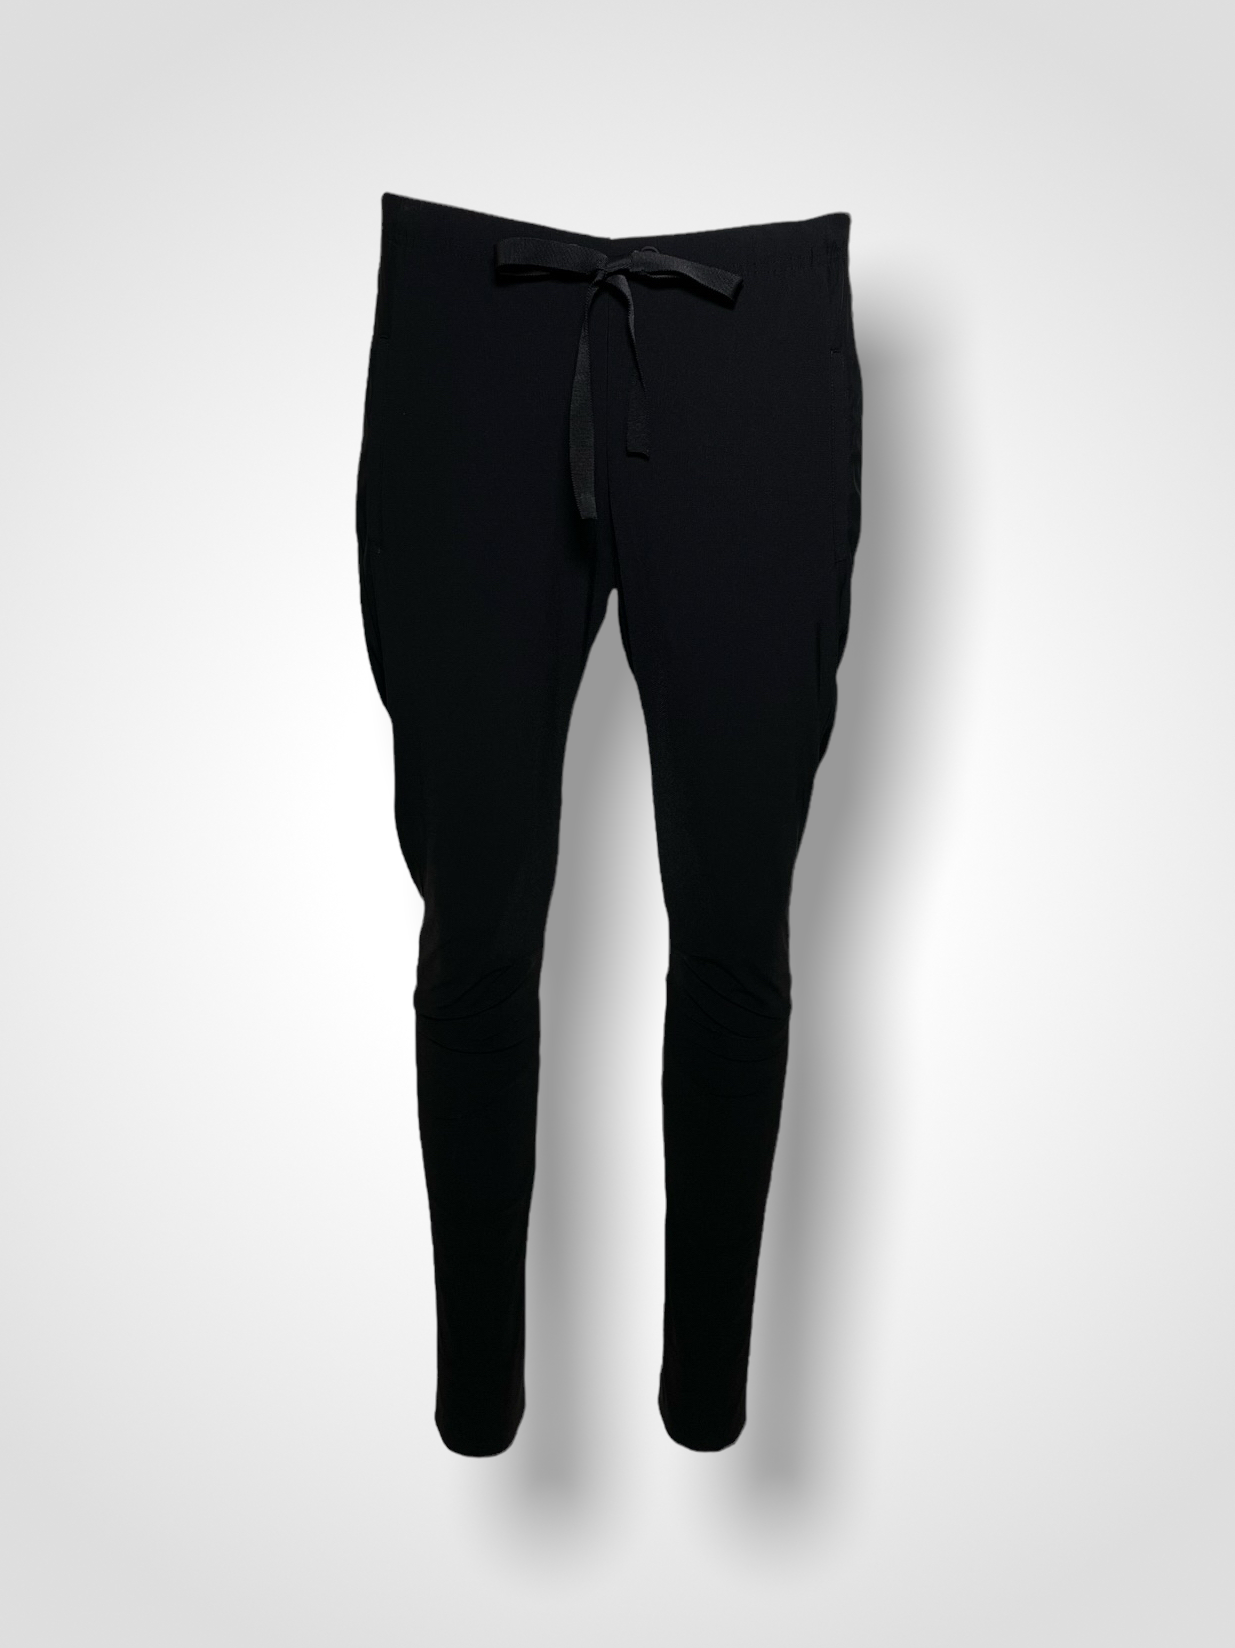 HENSLEY LEGGINGS / COOL-TOUCH TRICOT - C8